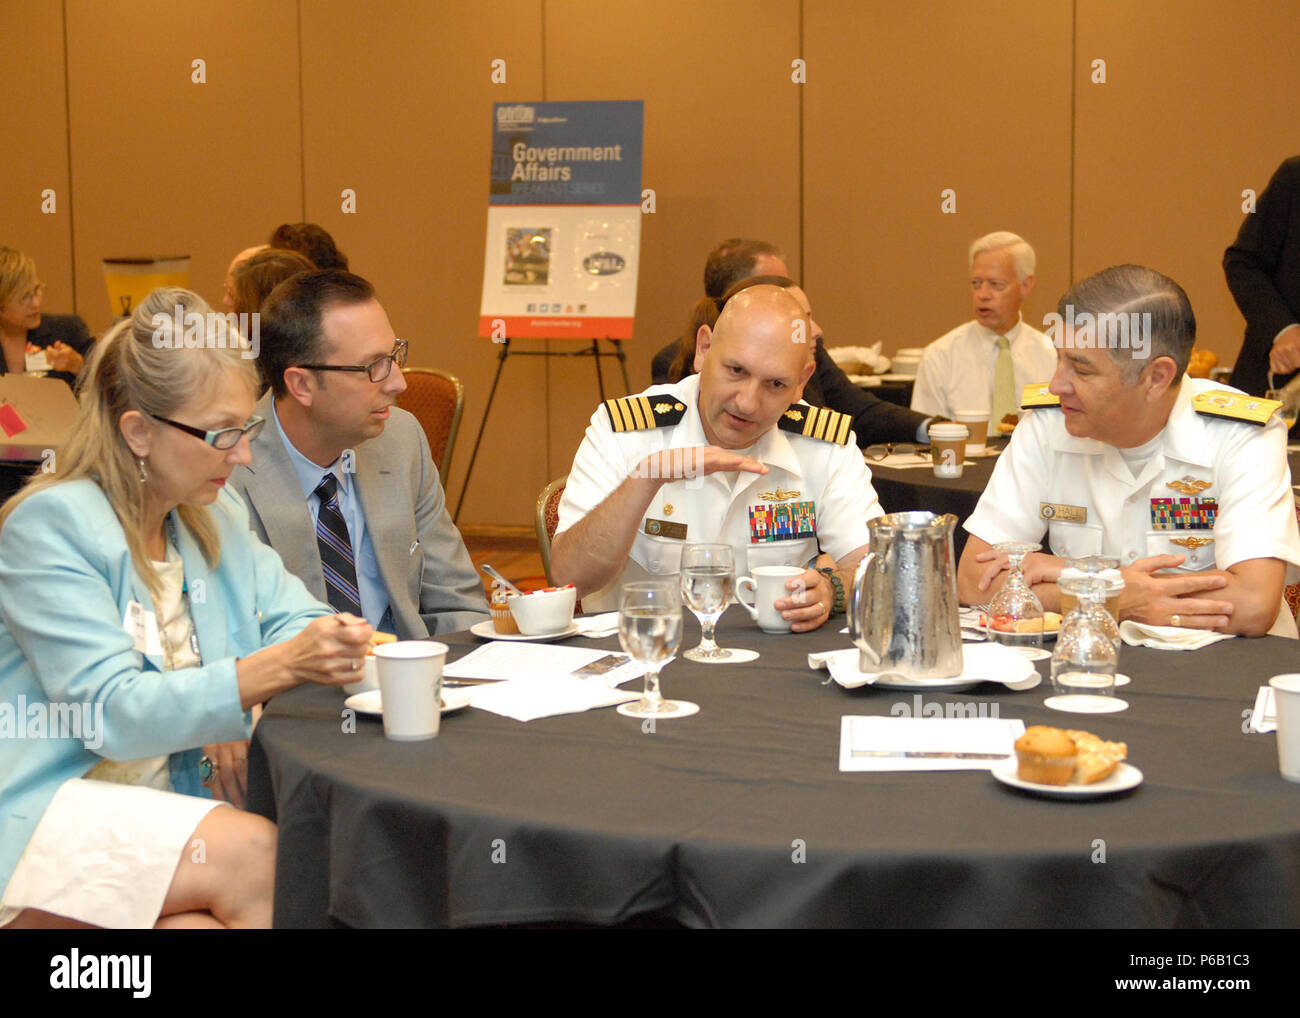 160614-N-QH078-035 DAYTON, Ohio (June 14, 2016) Capt. Rees L. Lee, Naval Medical Research Unit-Dayton Commanding Officer, and Rear Adm. Victor W. Hall, Navy Medicine West Deputy Commander, Deputy Corps Chief for Medical Service Corps, talks with members of the Dayton Area Chamber of Commerce June 14, during Navy Week Dayton, Ohio. Navy weeks are events held throughout the United States to help raise public awareness of the U.S. Navy in areas that are not typically exposed to a large naval presence. (U.S. Navy photo by Mass Communication Specialist 2nd Class (SW/AW) Dominique J. Shelton/Release Stock Photo